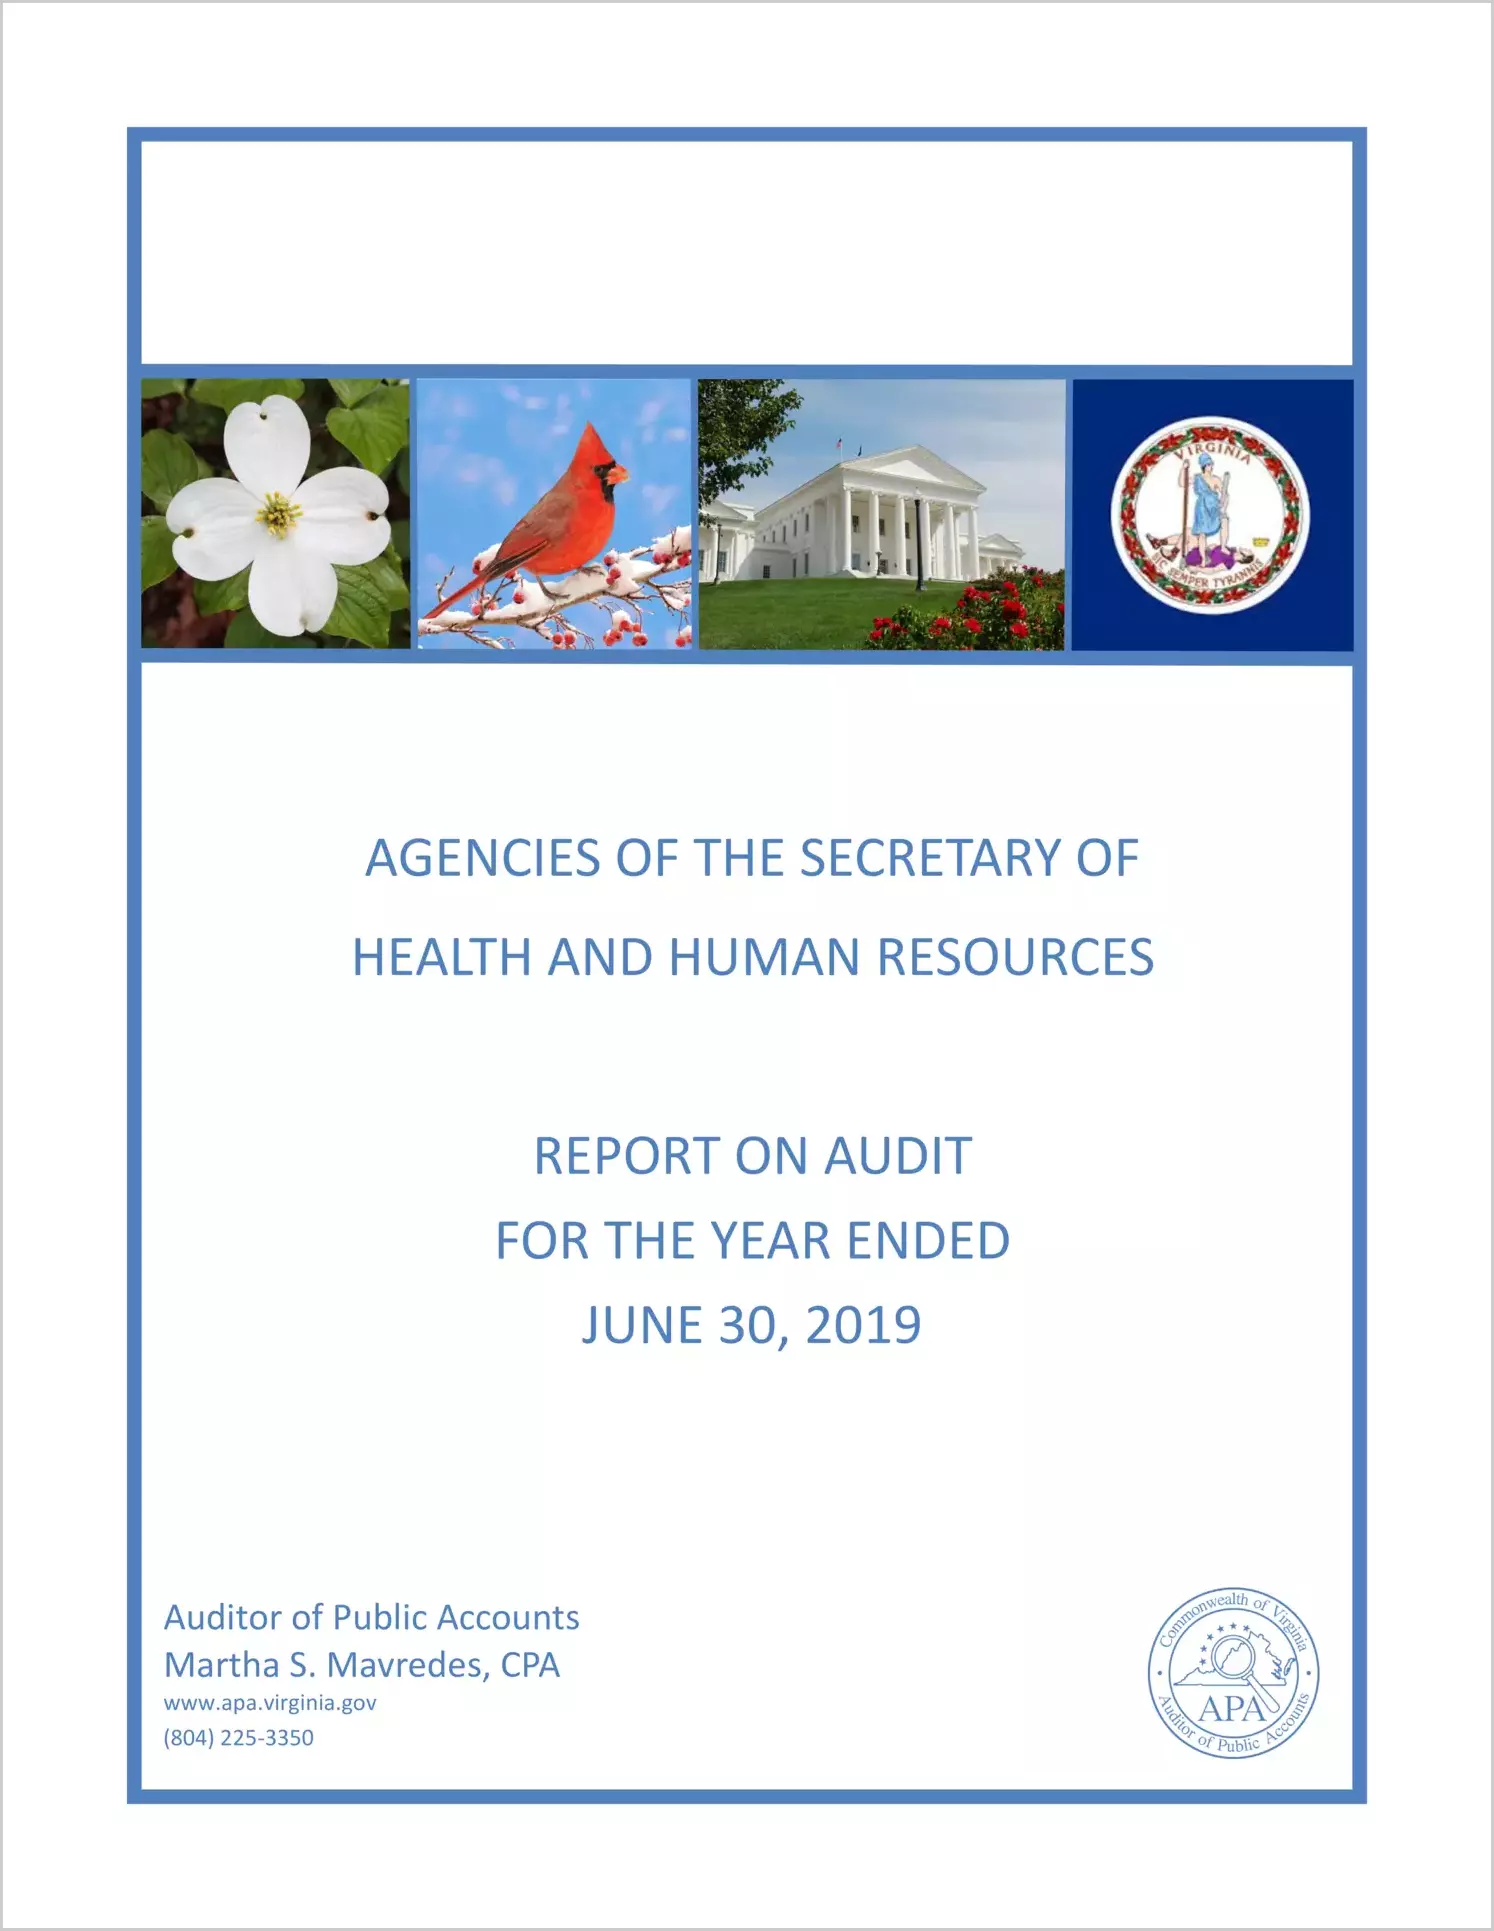 Agencies of the Secretary of Health and Human Resources for the year ended June 30, 2019